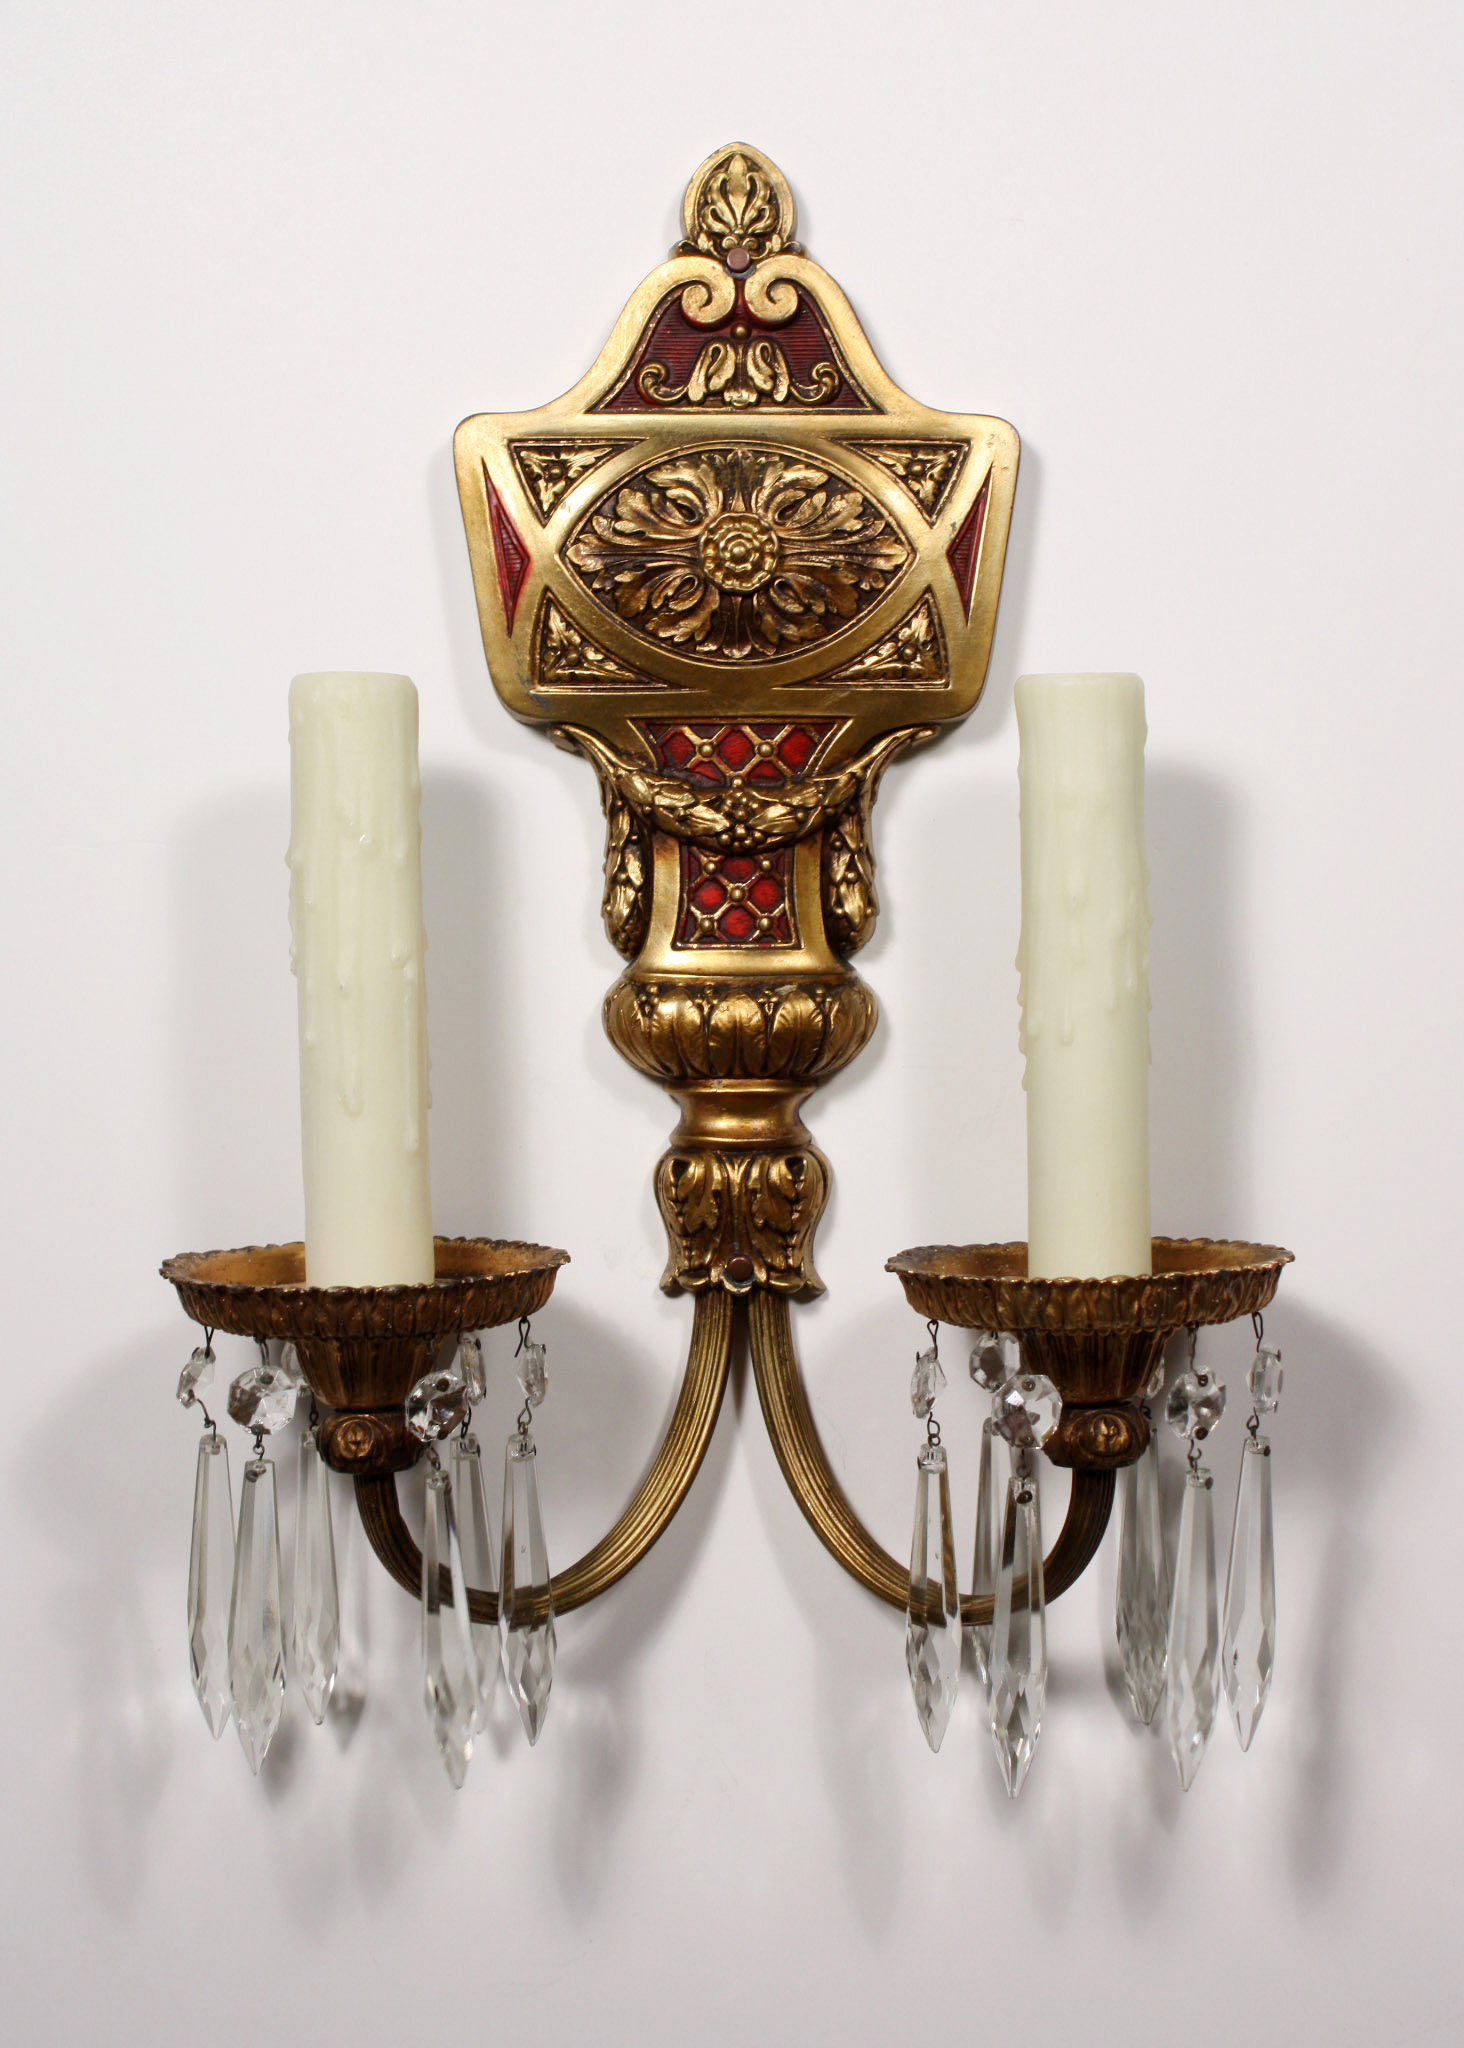 SOLD Outstanding Pair of Antique Georgian Double-Arm Sconces with Prisms, Original Red Polychrome Finish-18704